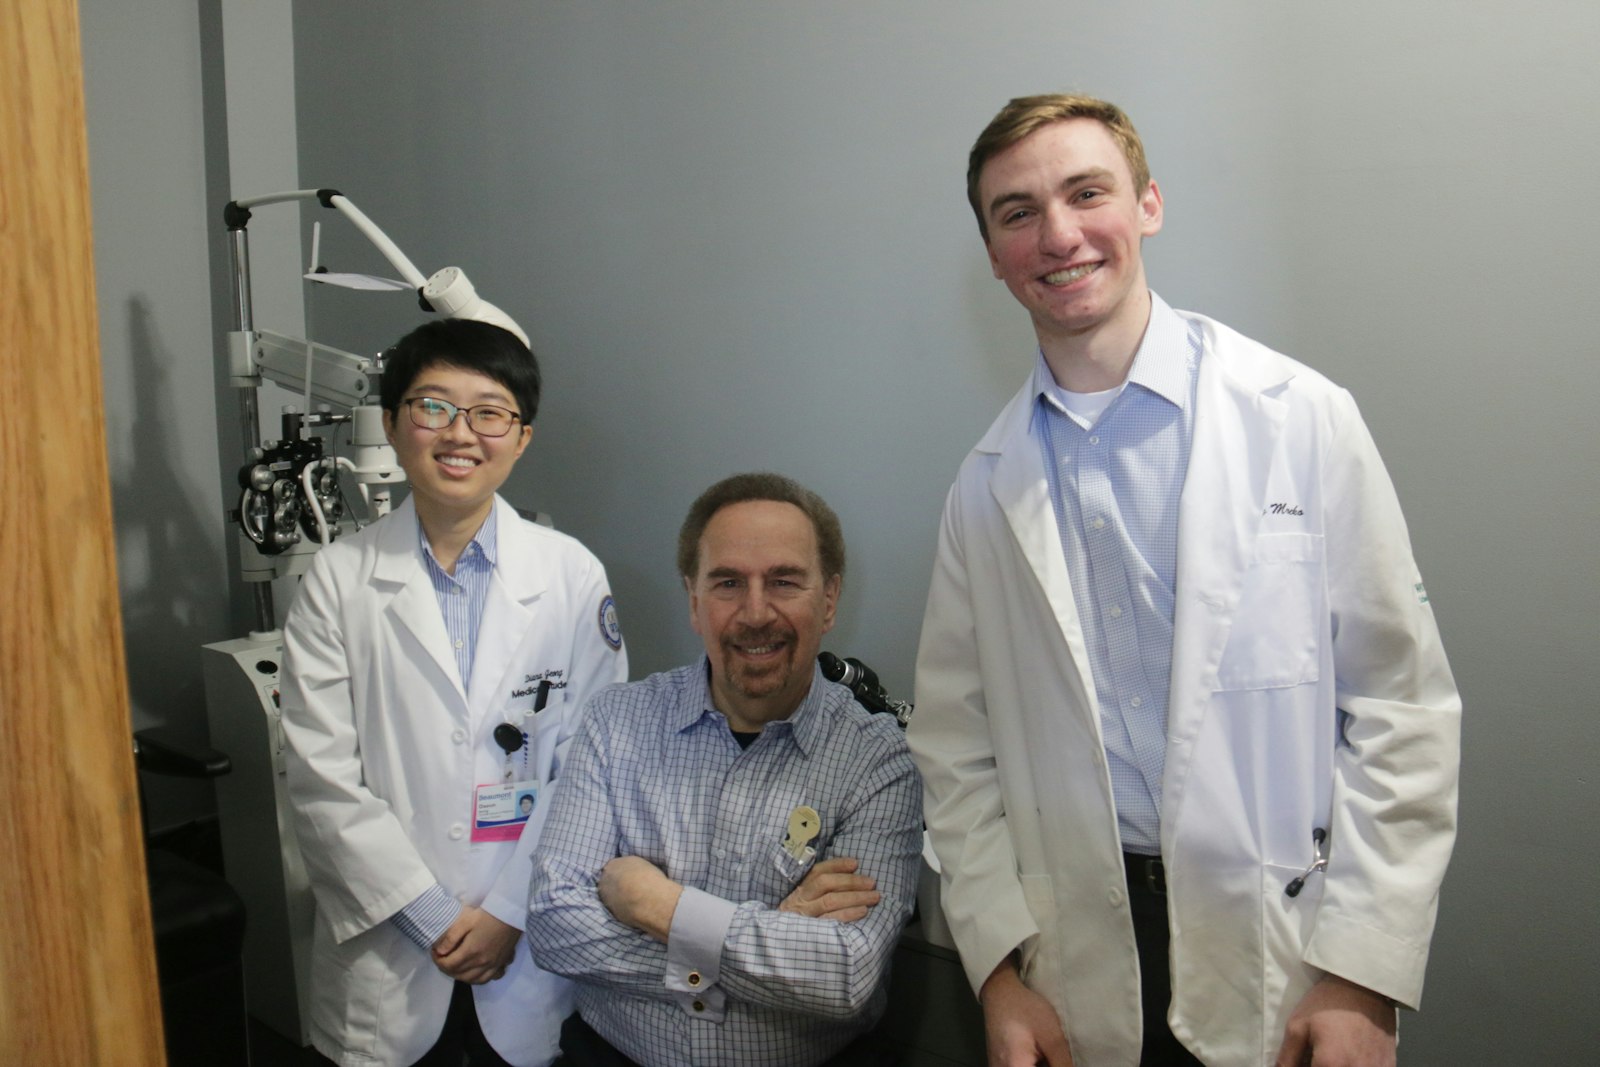 Dr. Joel Pelavin of Eastside Eye Physicians in St. Clair Shores will be providing free checkups and consultations once a month at the eye clinic, working alongside medical students like Diana Jeong (left) of Oakland University's William Beaumont School of Medicine, and Anthony Mrocko (right) of Wayne State University's School of Medicine.